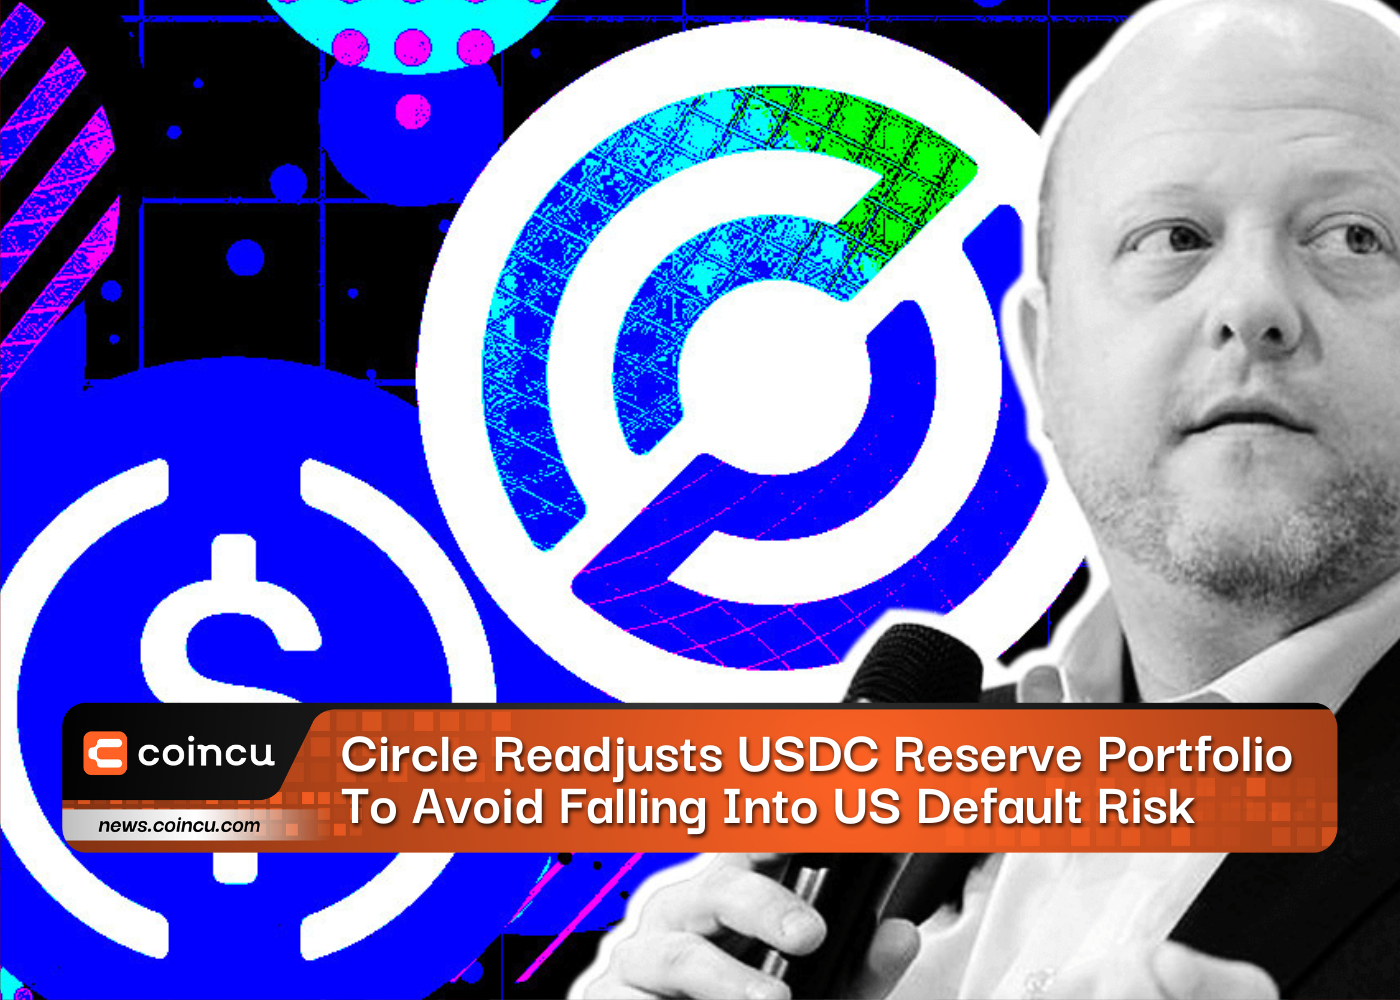 Circle Readjusts USDC Reserve Portfolio To Avoid Falling Into US Default Risk